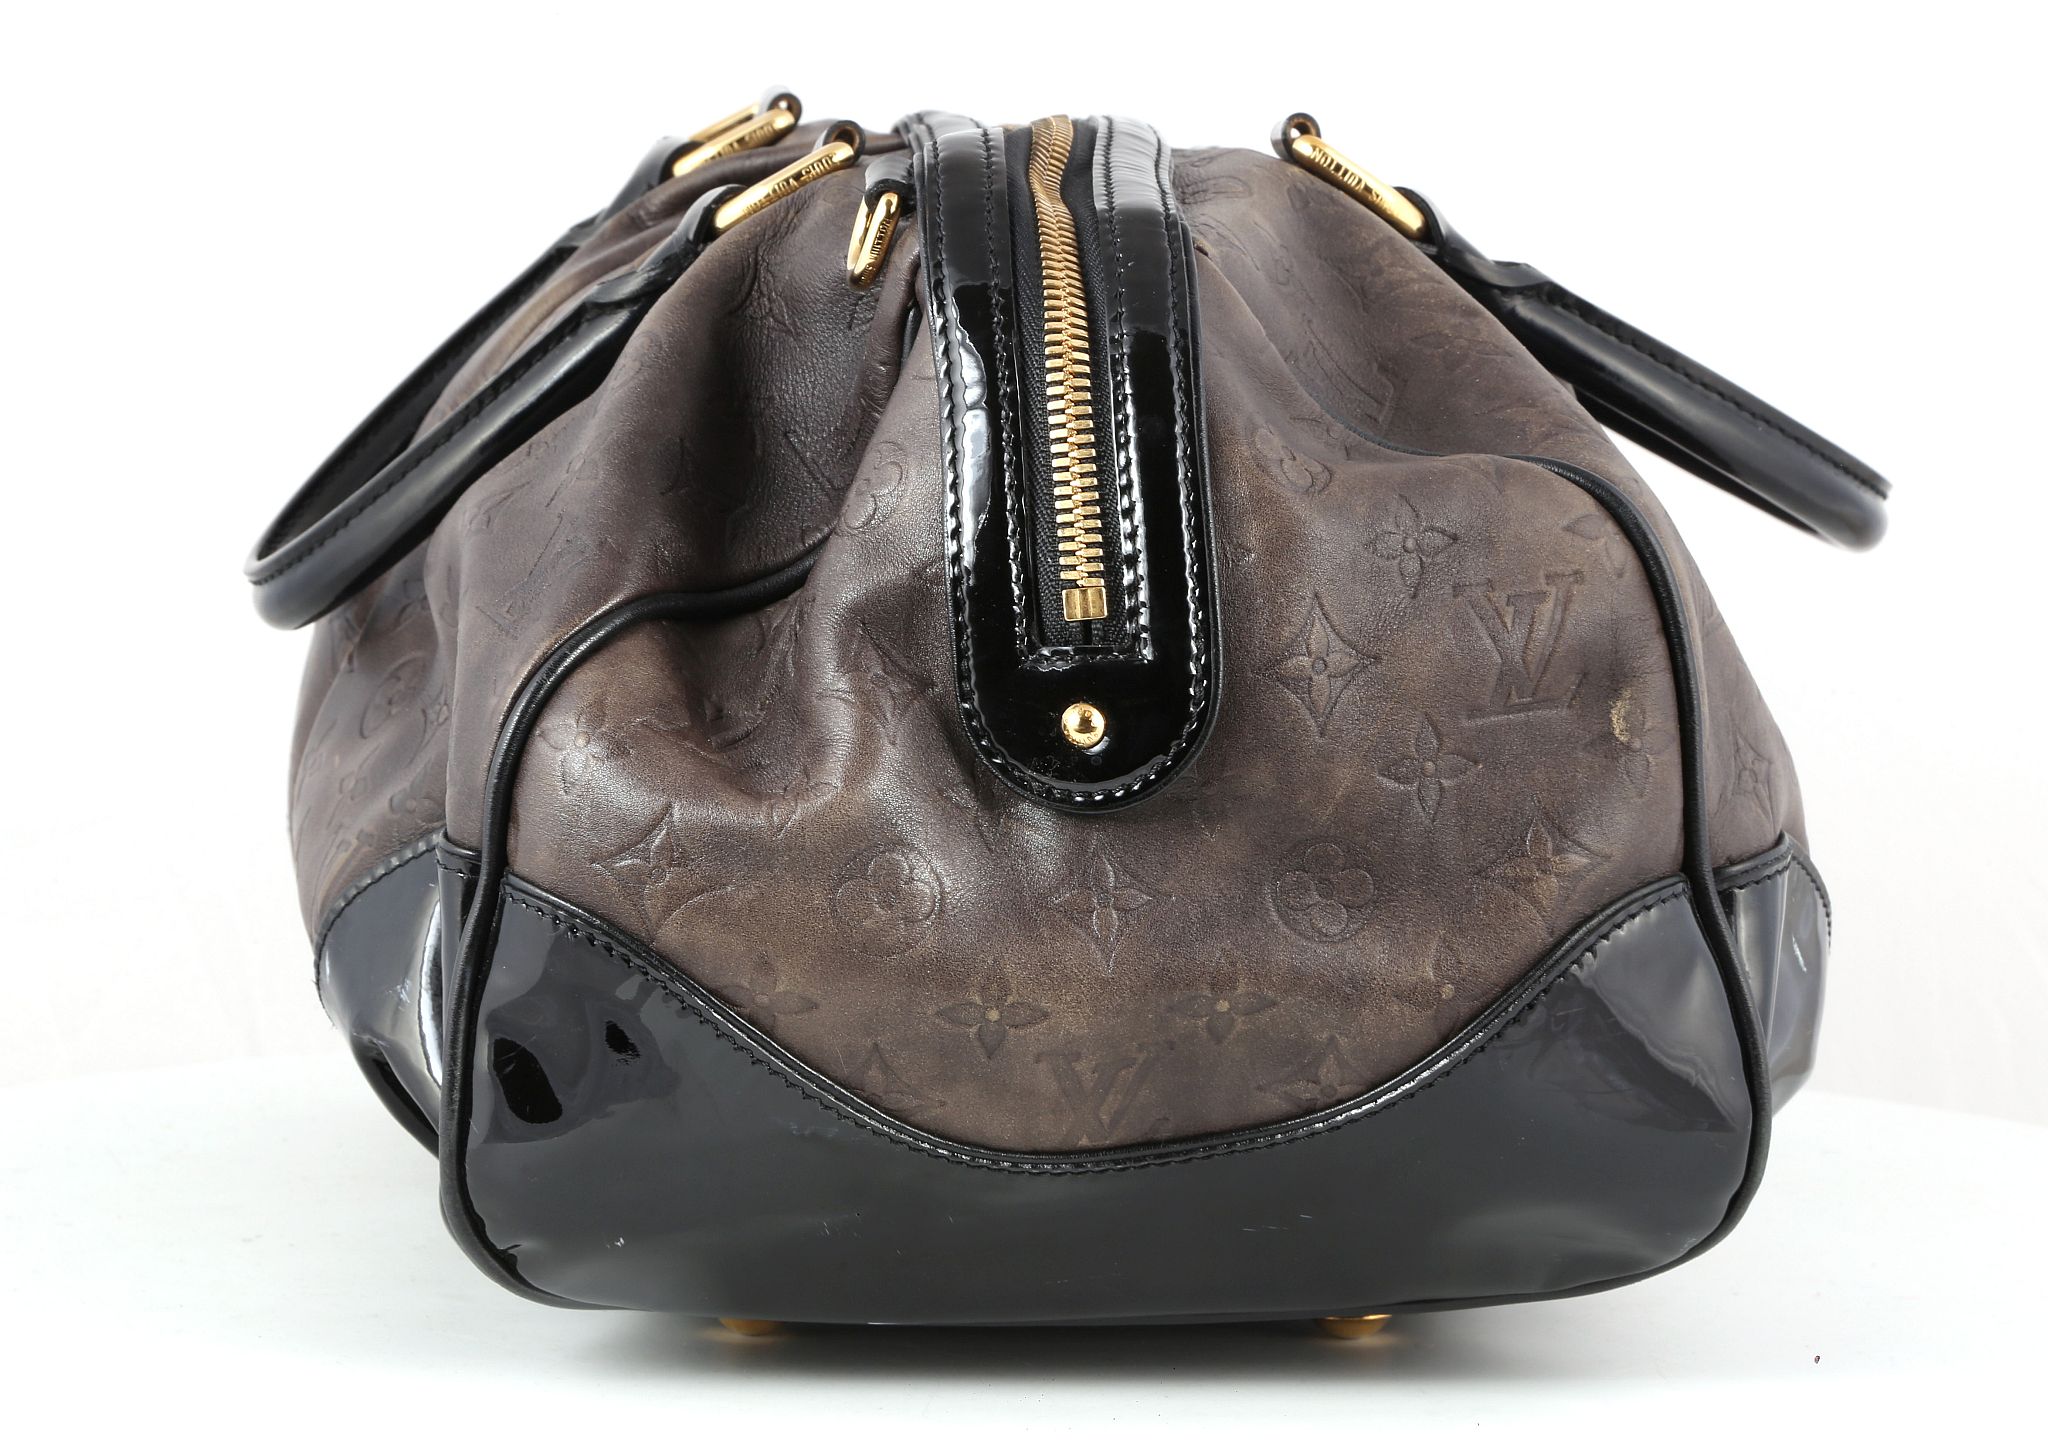 LOUIS VUITTON STEPHEN BOSTON HANDBAG, date code for 2006, embossed monogram leather with black - Image 9 of 12